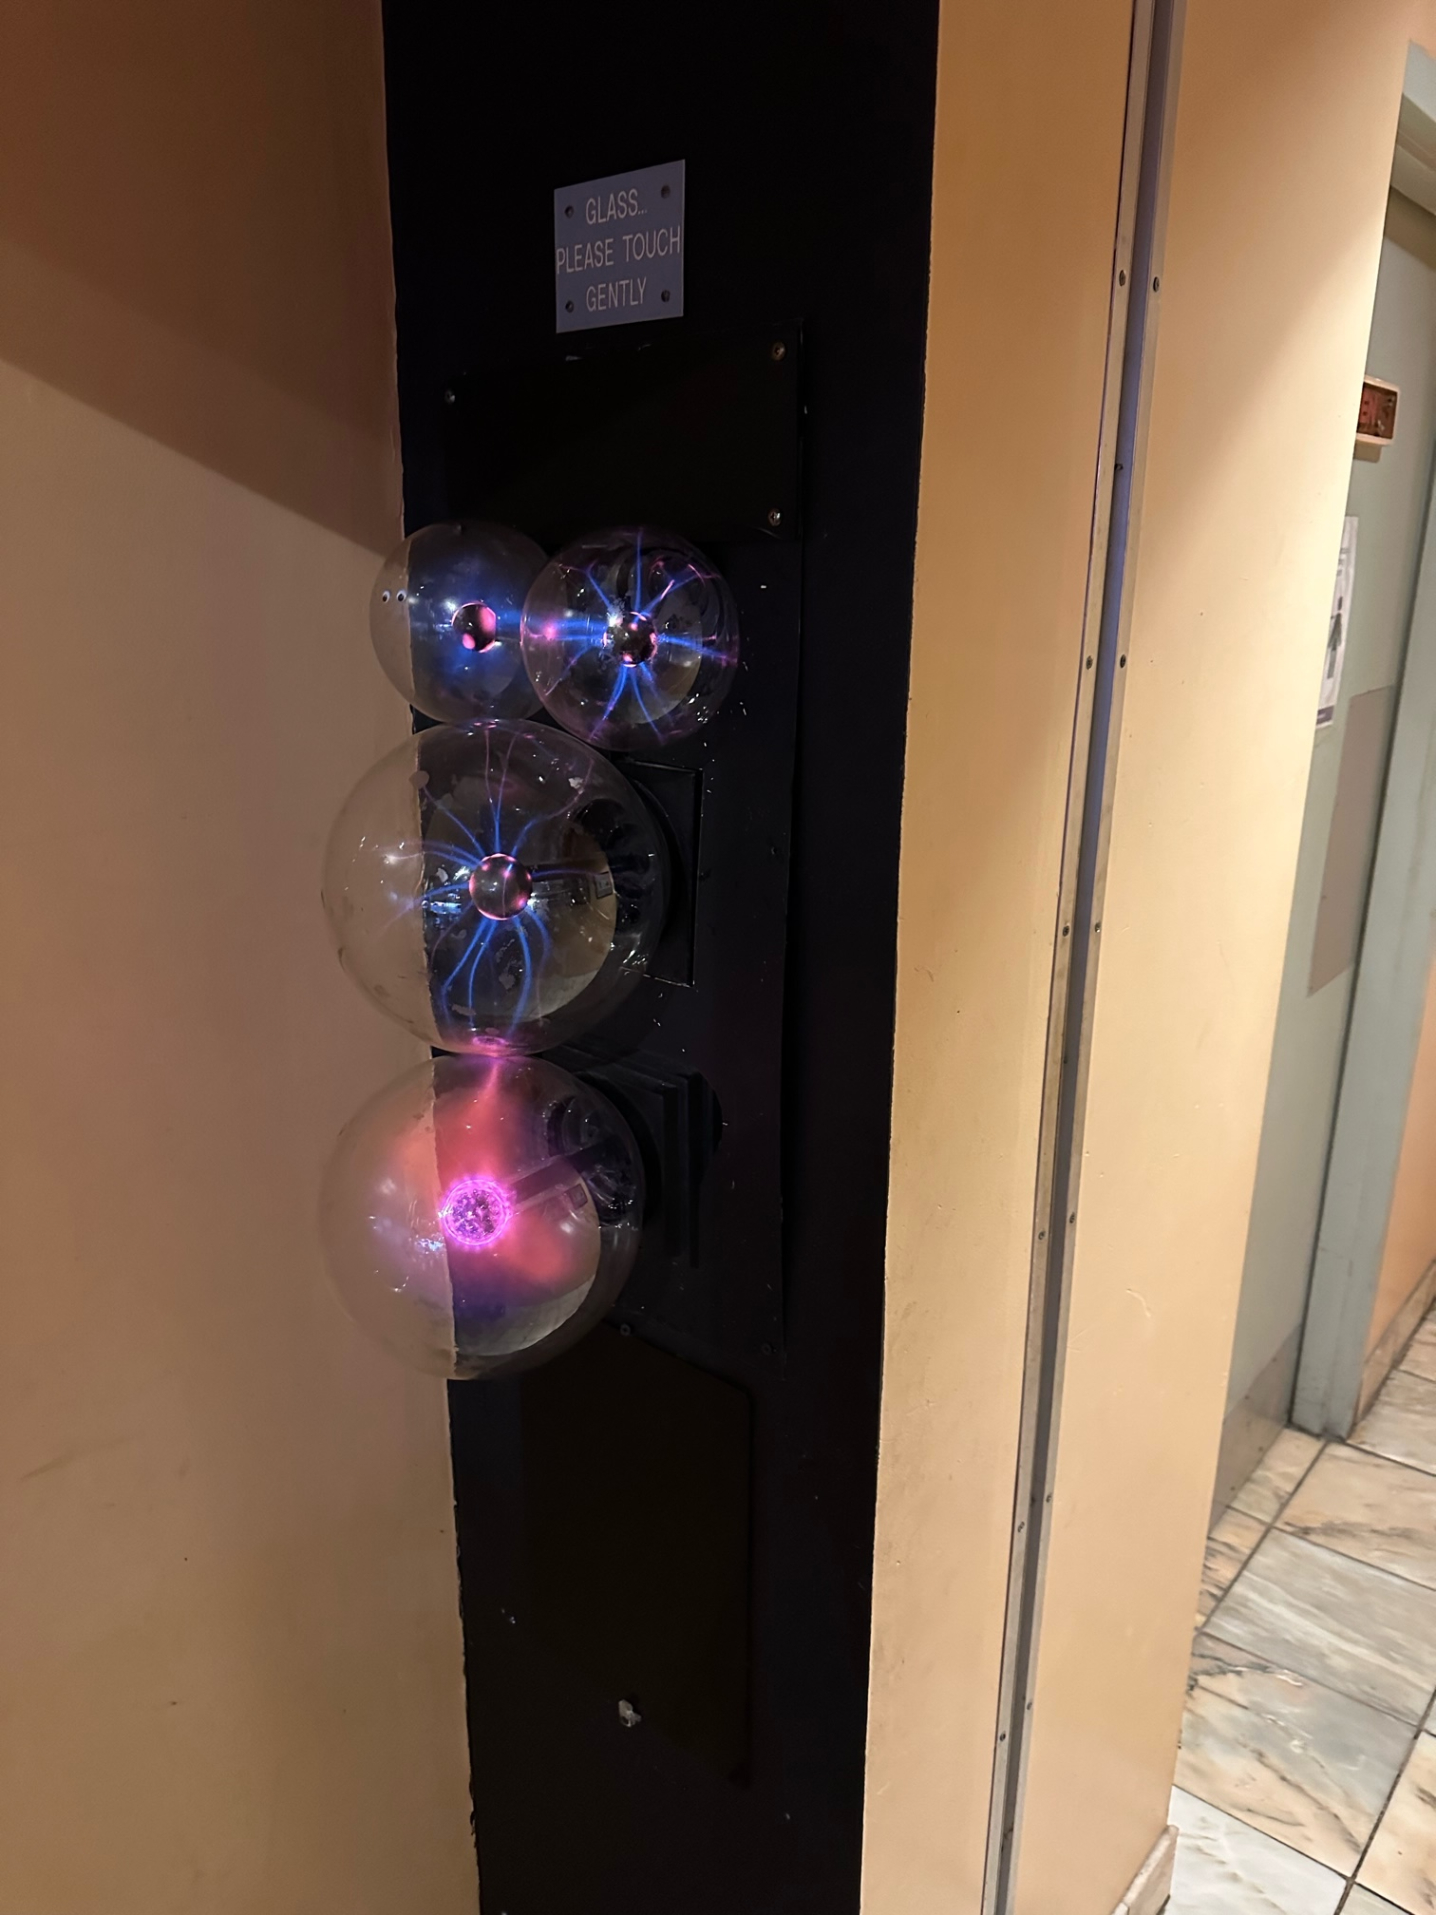 Four clear globes with lightning on display at a local restaurant.